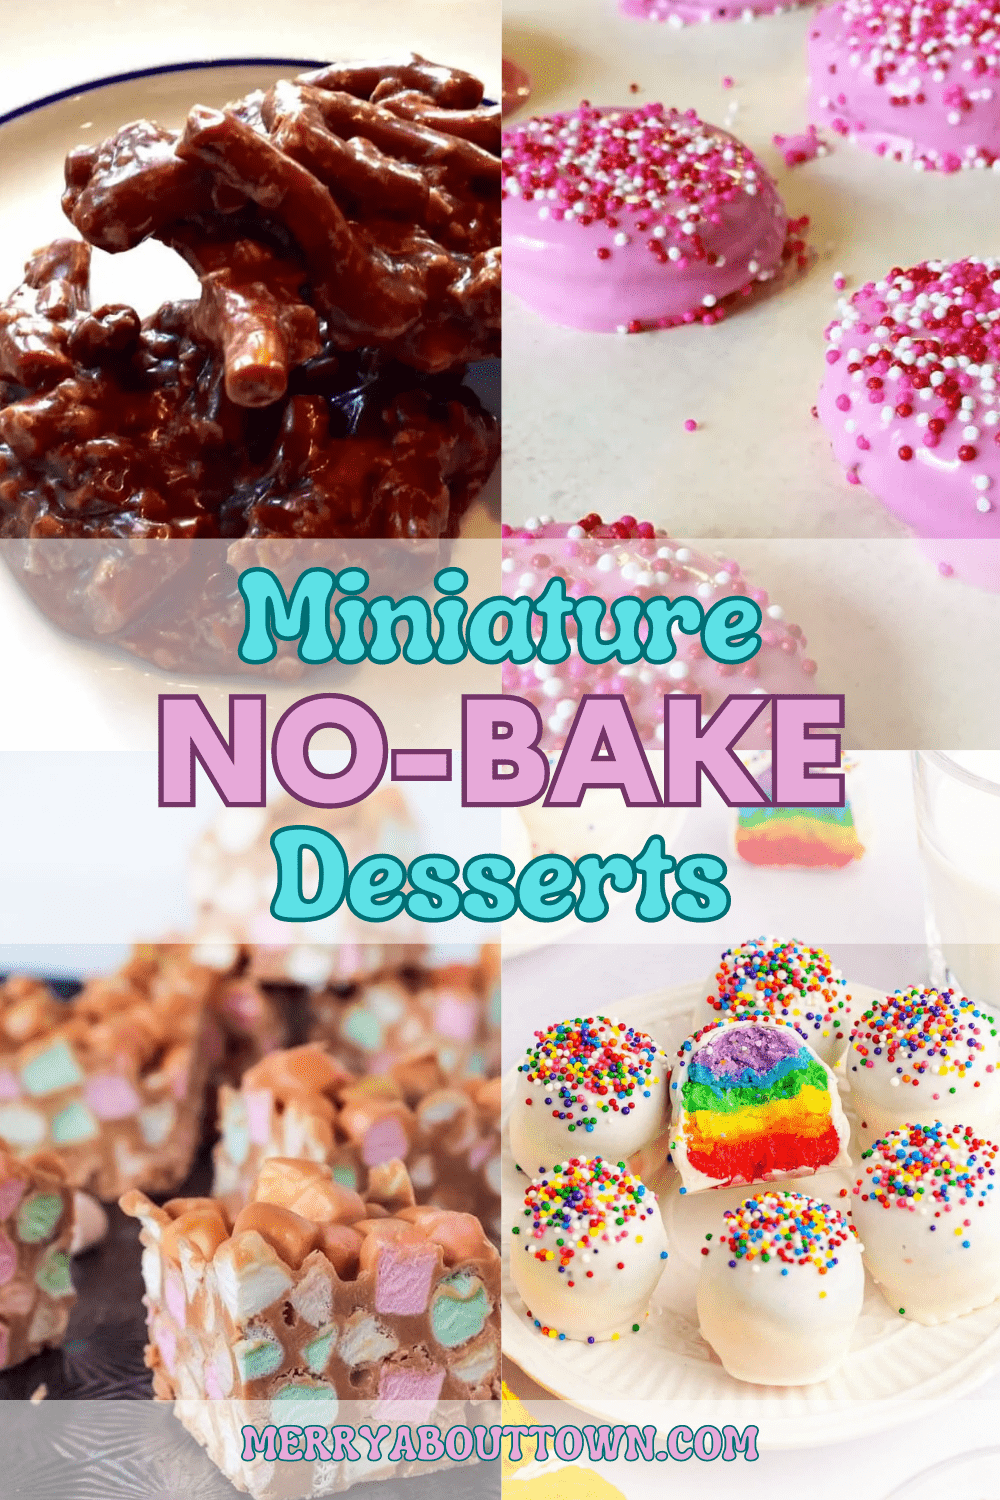 If ever you’re looking for a low effort dessert that requires zero baking, then make this list your ultimate reference! We put together some of the tastiest no-bake mini desserts we could find!